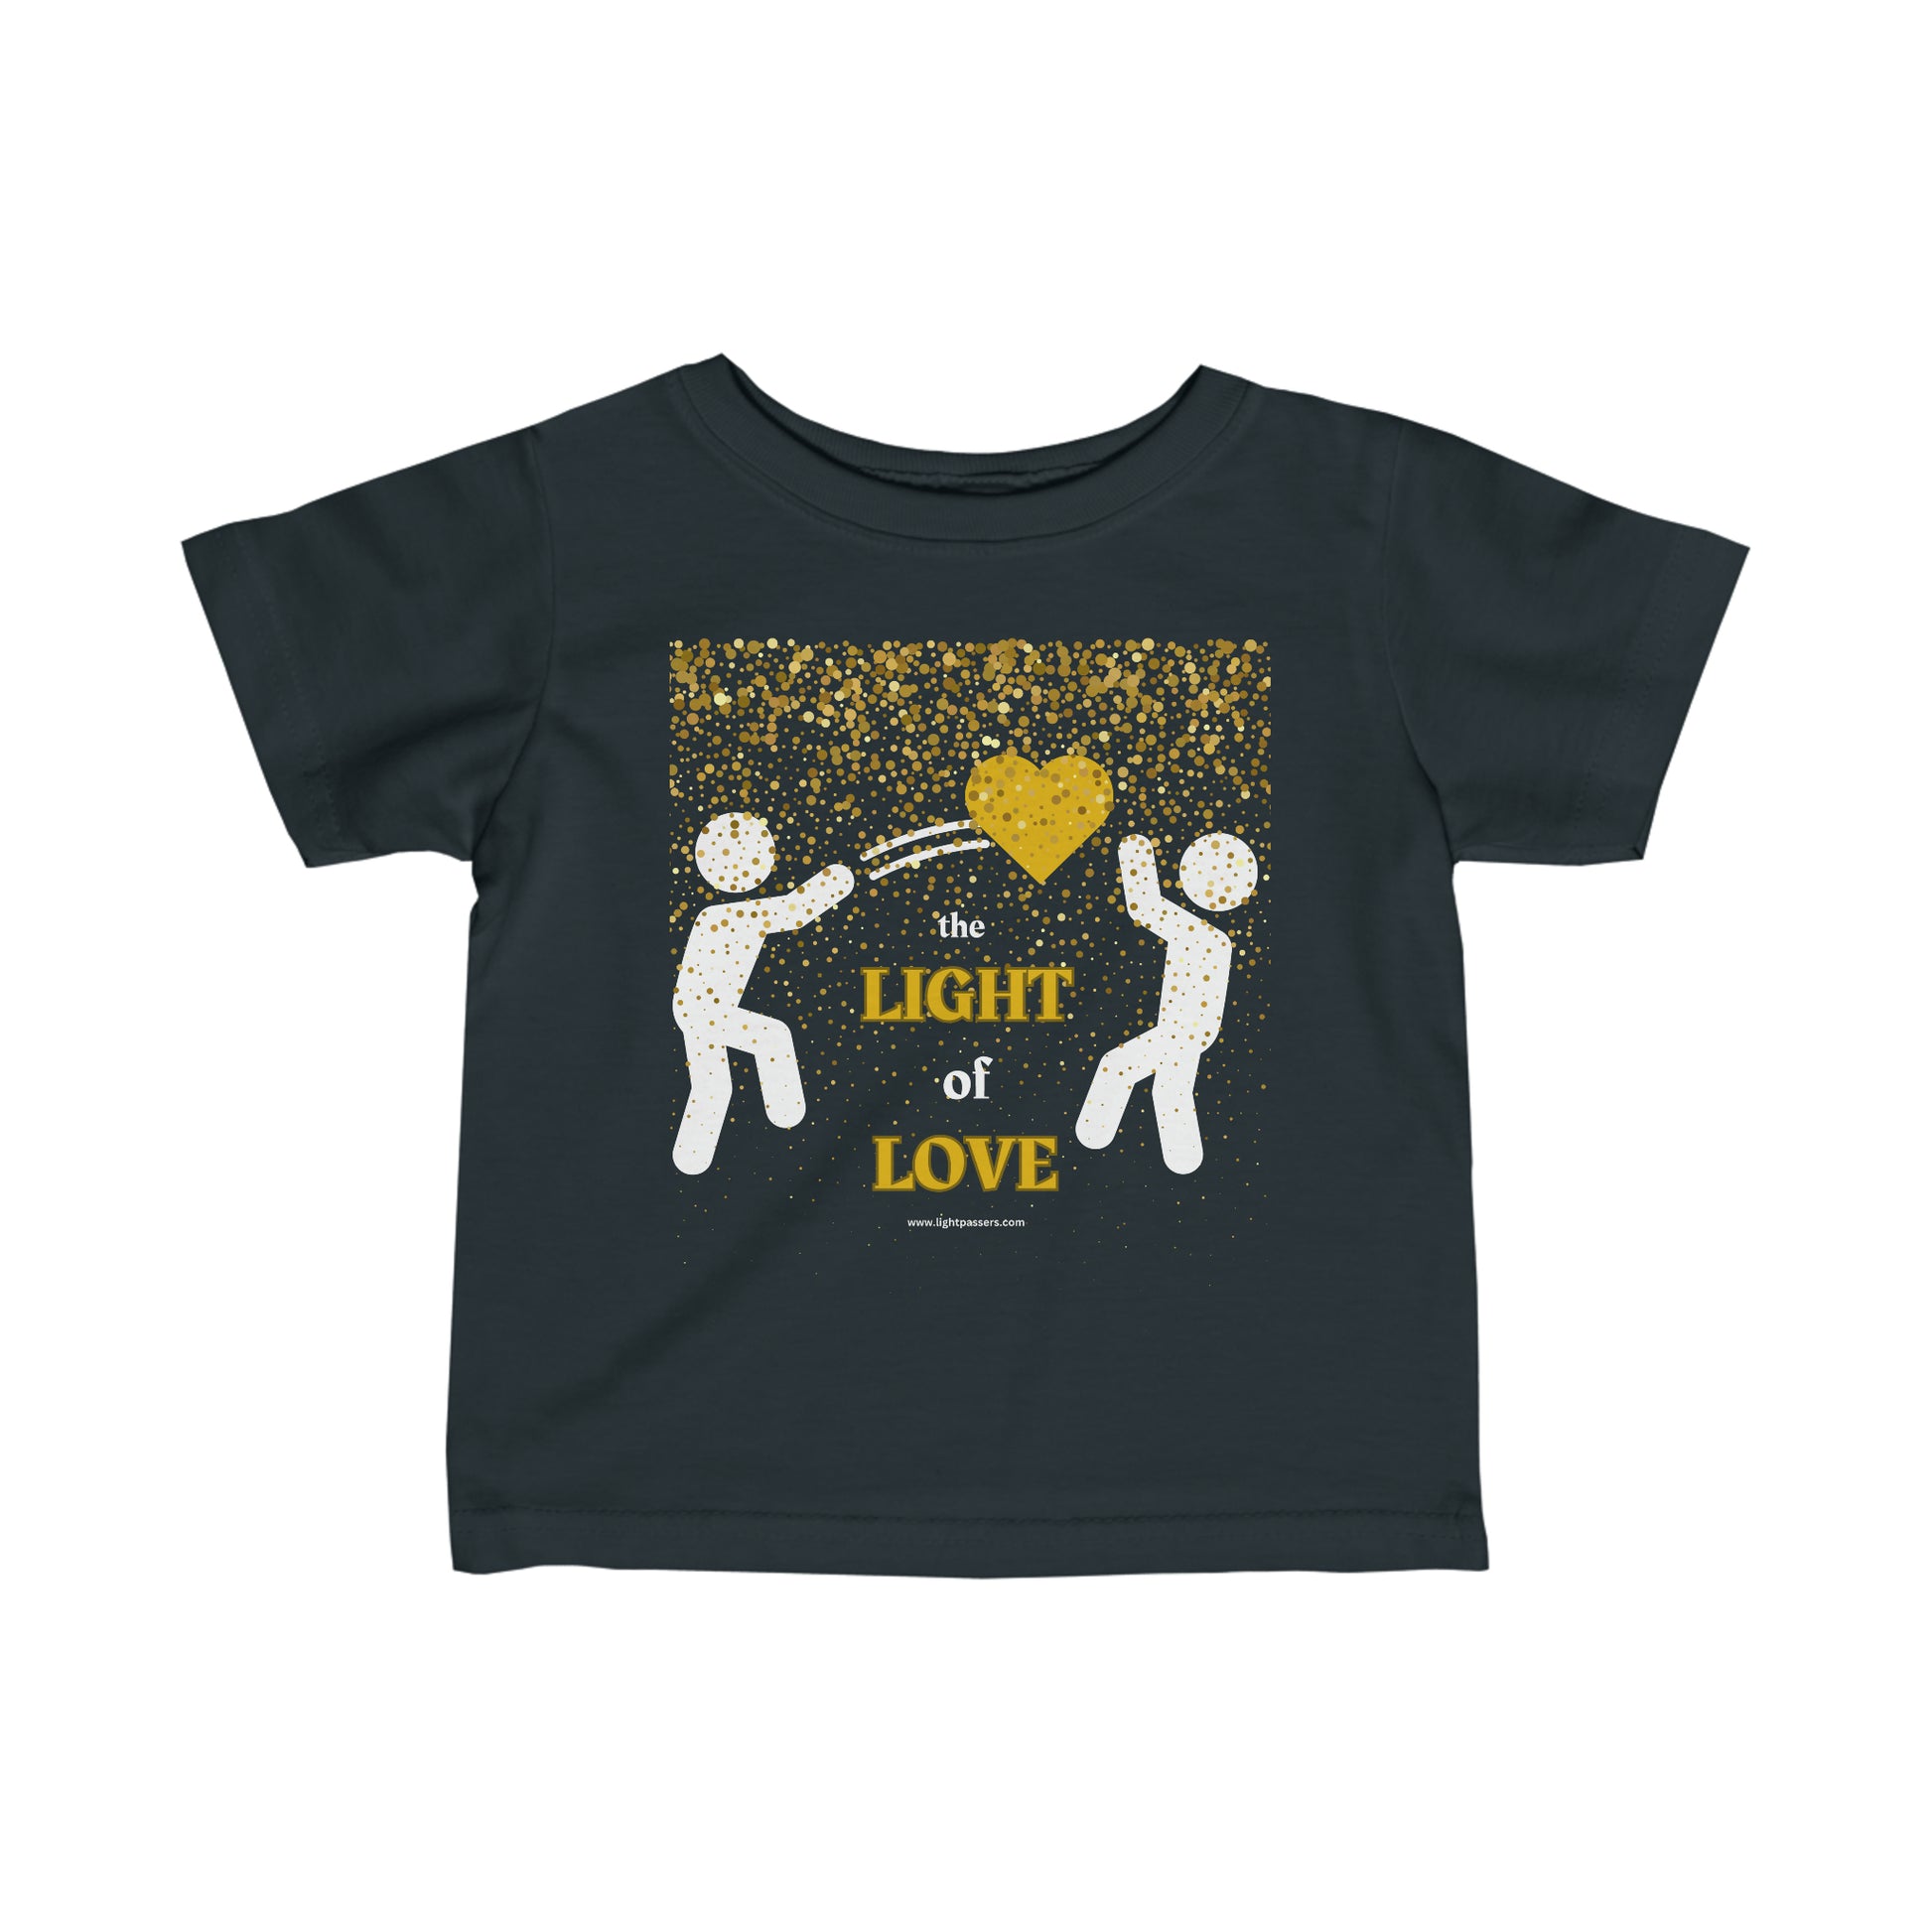 A baby tee with a black shirt featuring a white and gold heart design. Made of durable jersey fabric with ribbed knitting and taped shoulders for comfort and fit.